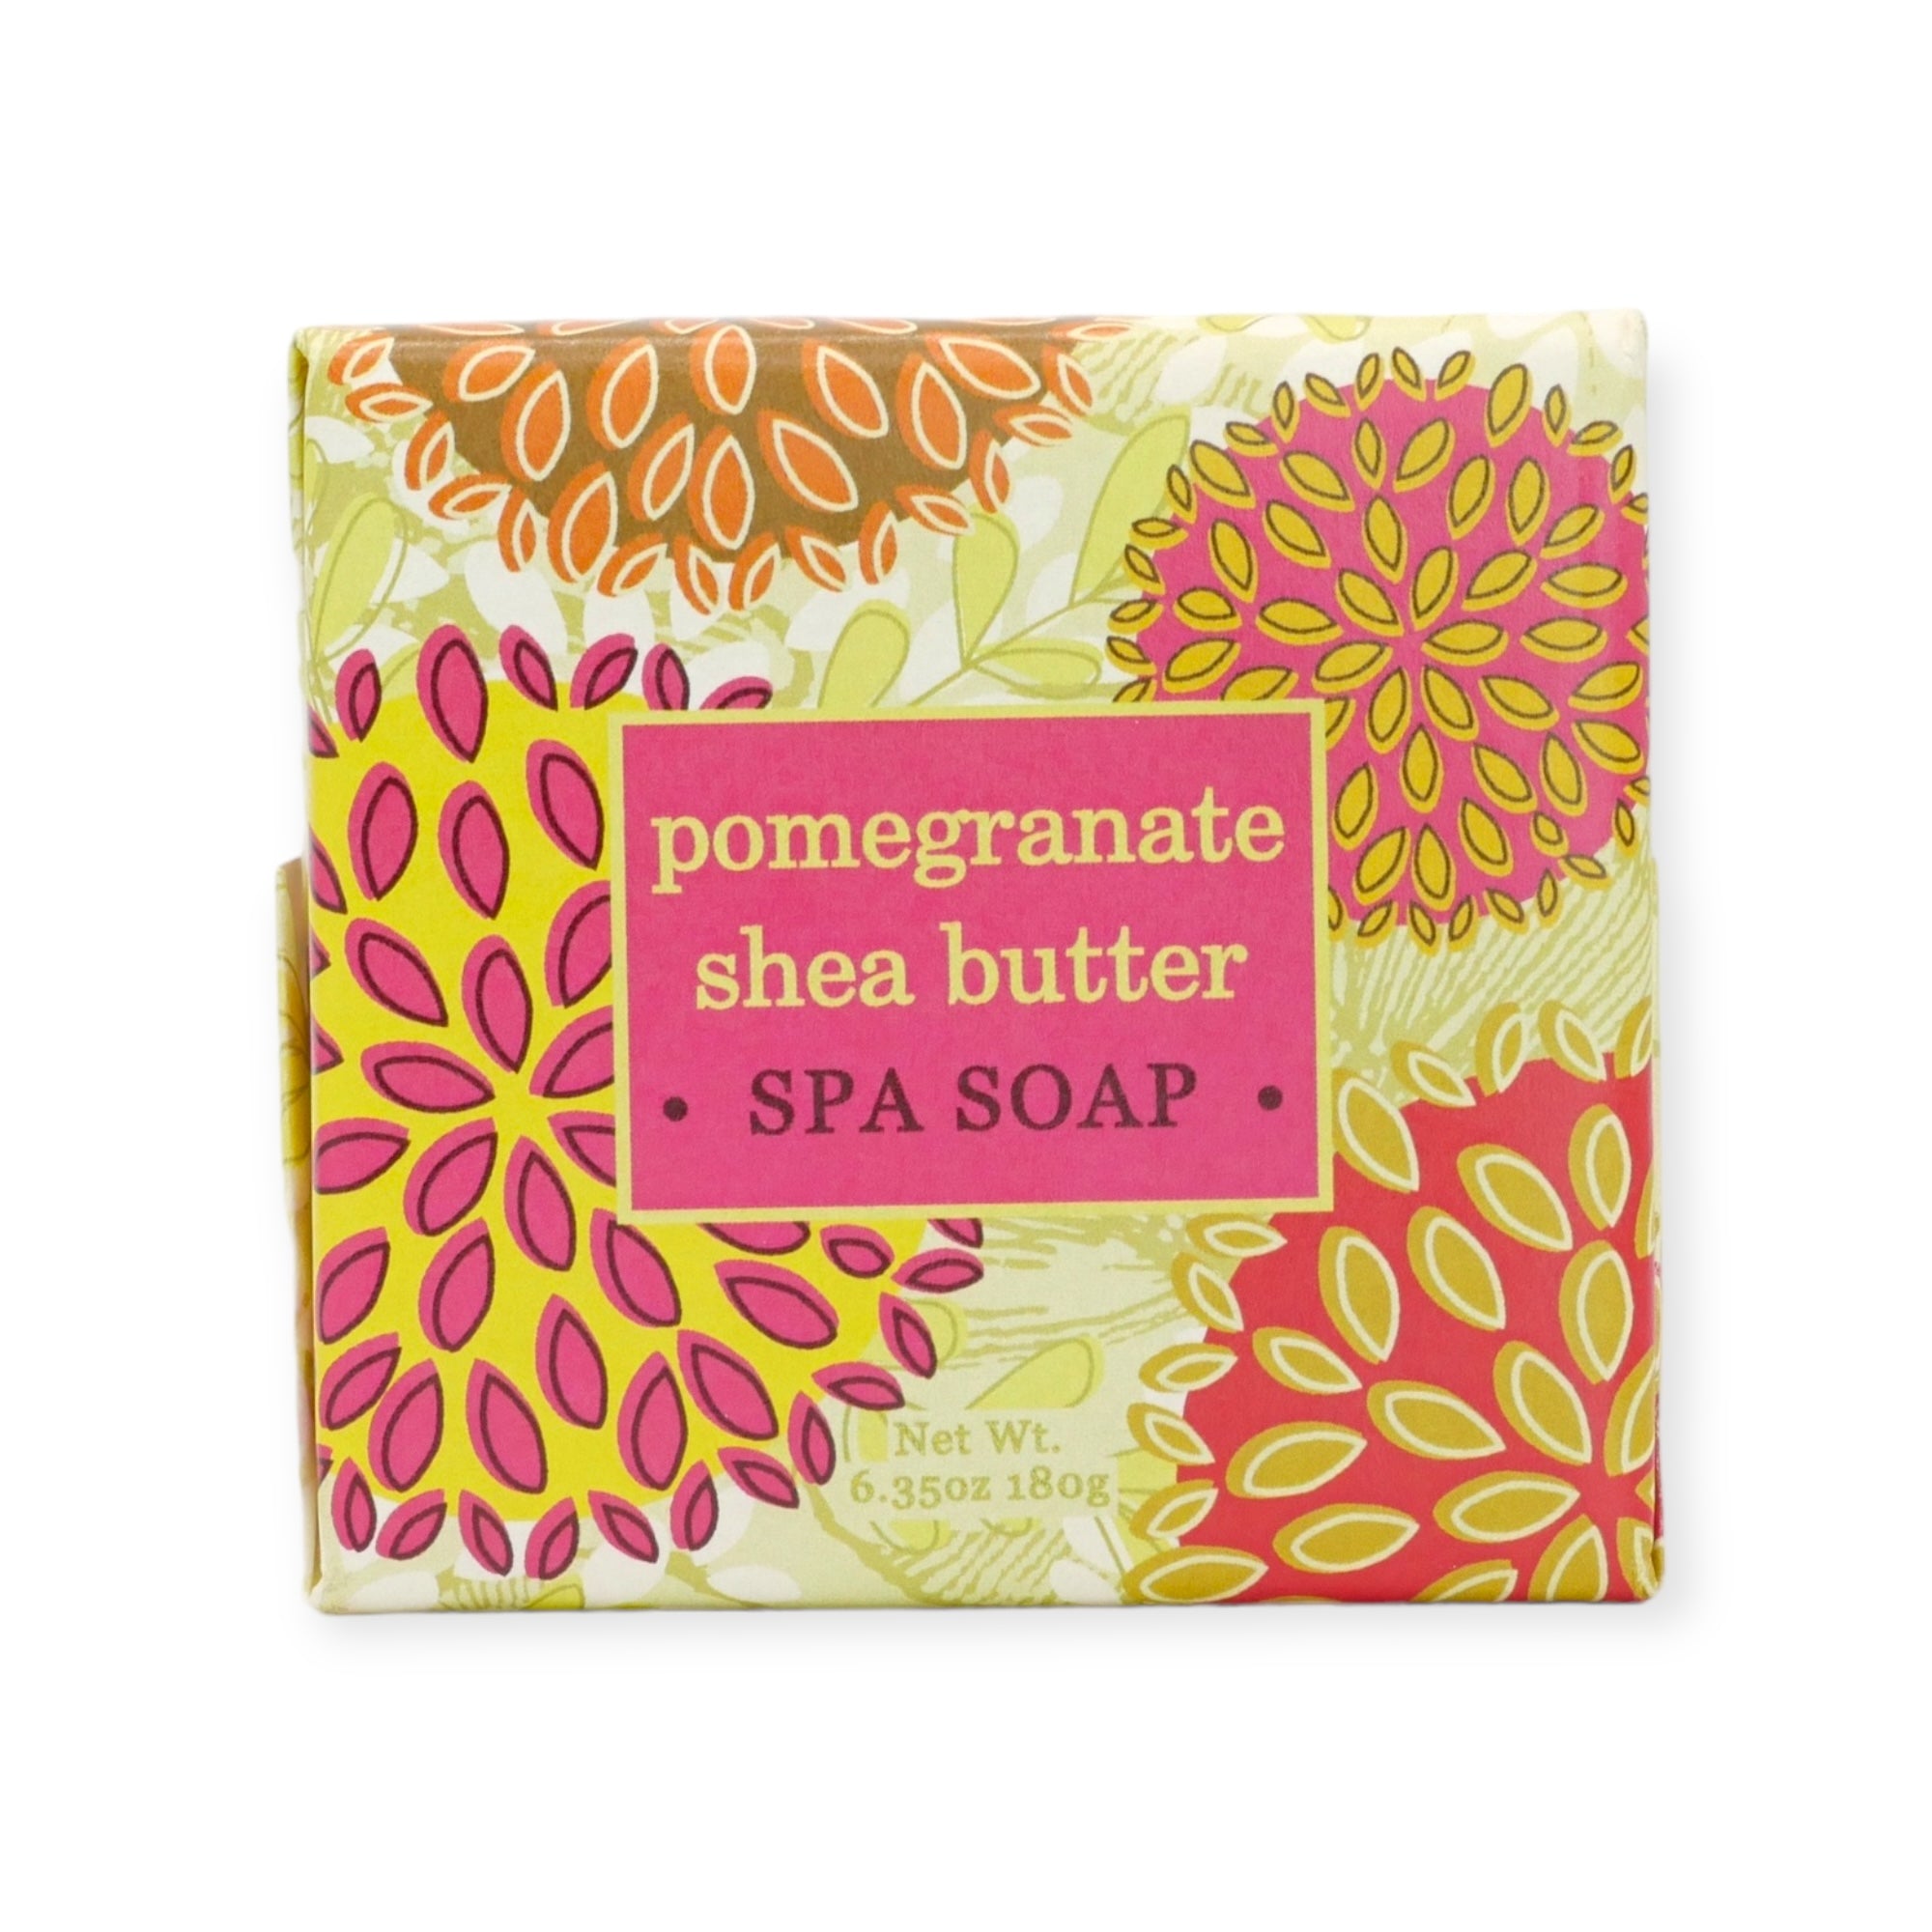 Pomegranate Shea Butter Spa Soap by Greenwich Bay Trading Co.